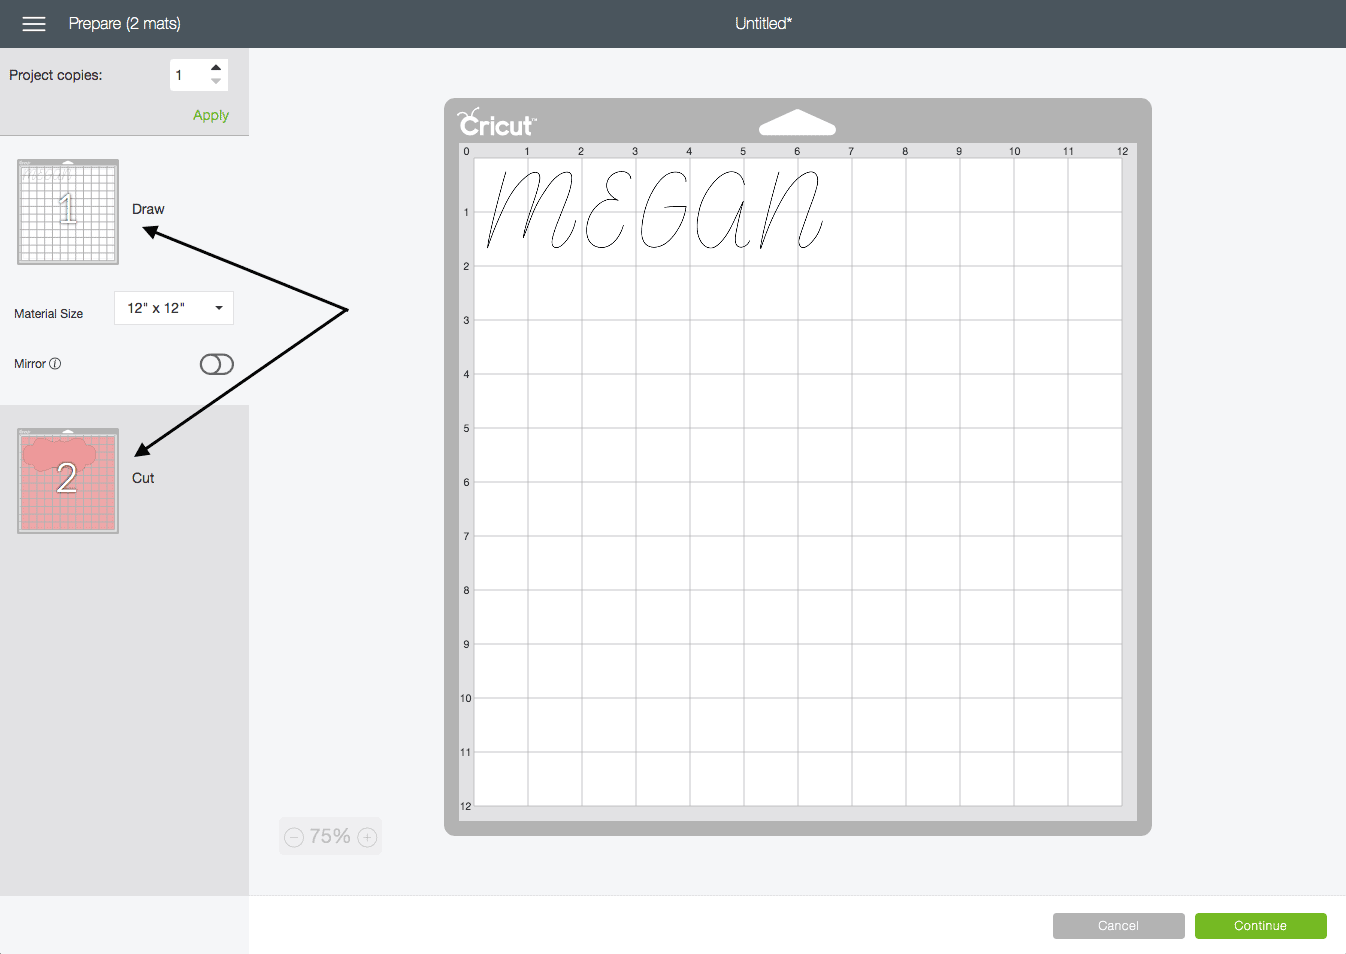 screenshot of the cricut design studio interface. The name "megan" it typed on the design canvas.